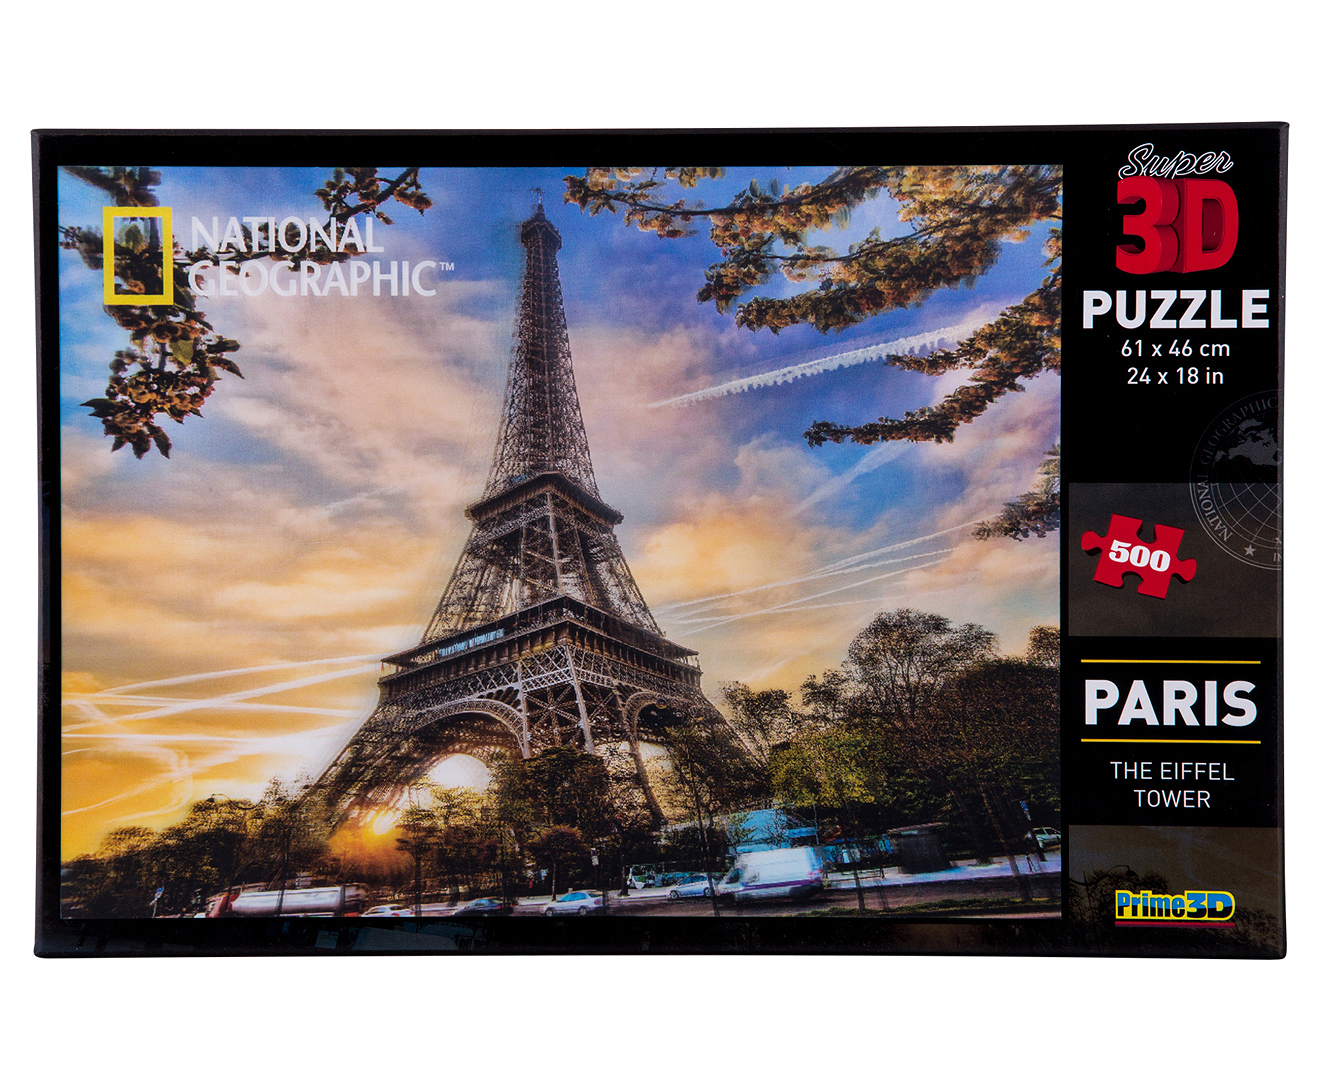 online jigsaw puzzles national geographic free